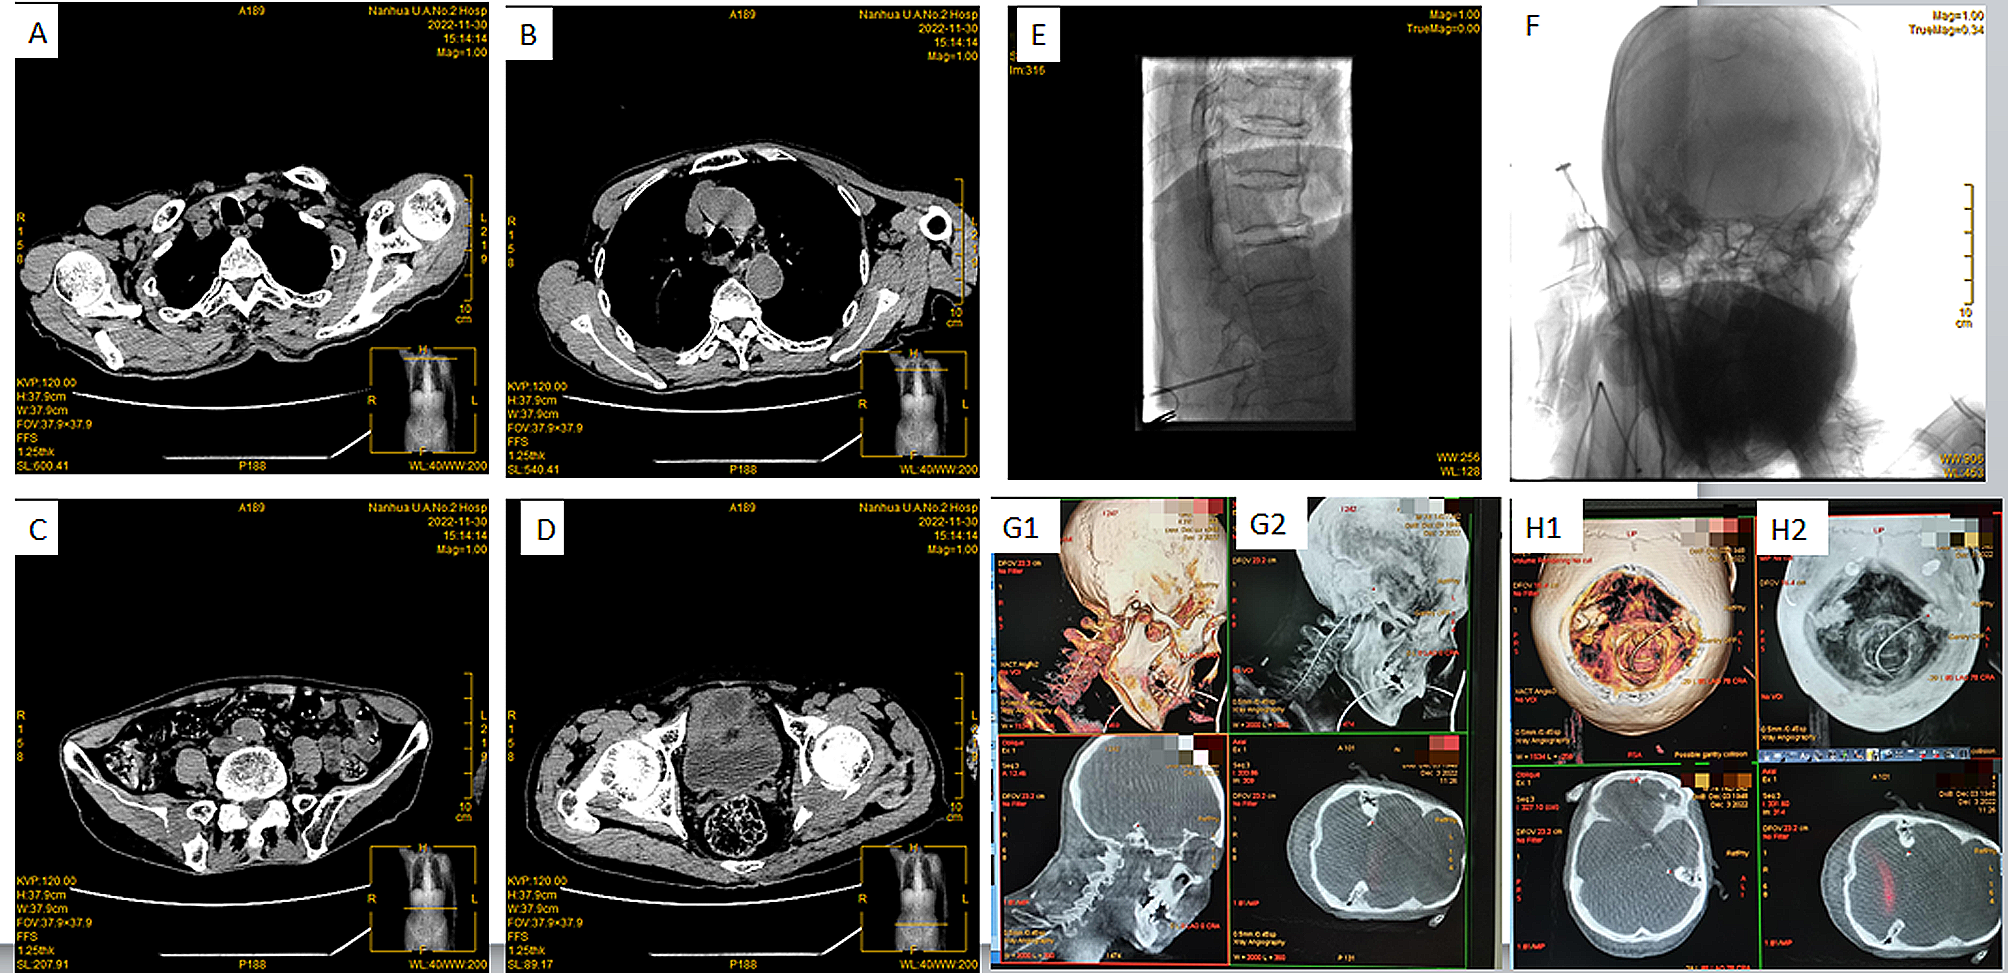 Intrathecal morphine delivery at prepontine cistern to control refractory cancer-related pain: a case report of extensive metastatic and refractory cancer pain